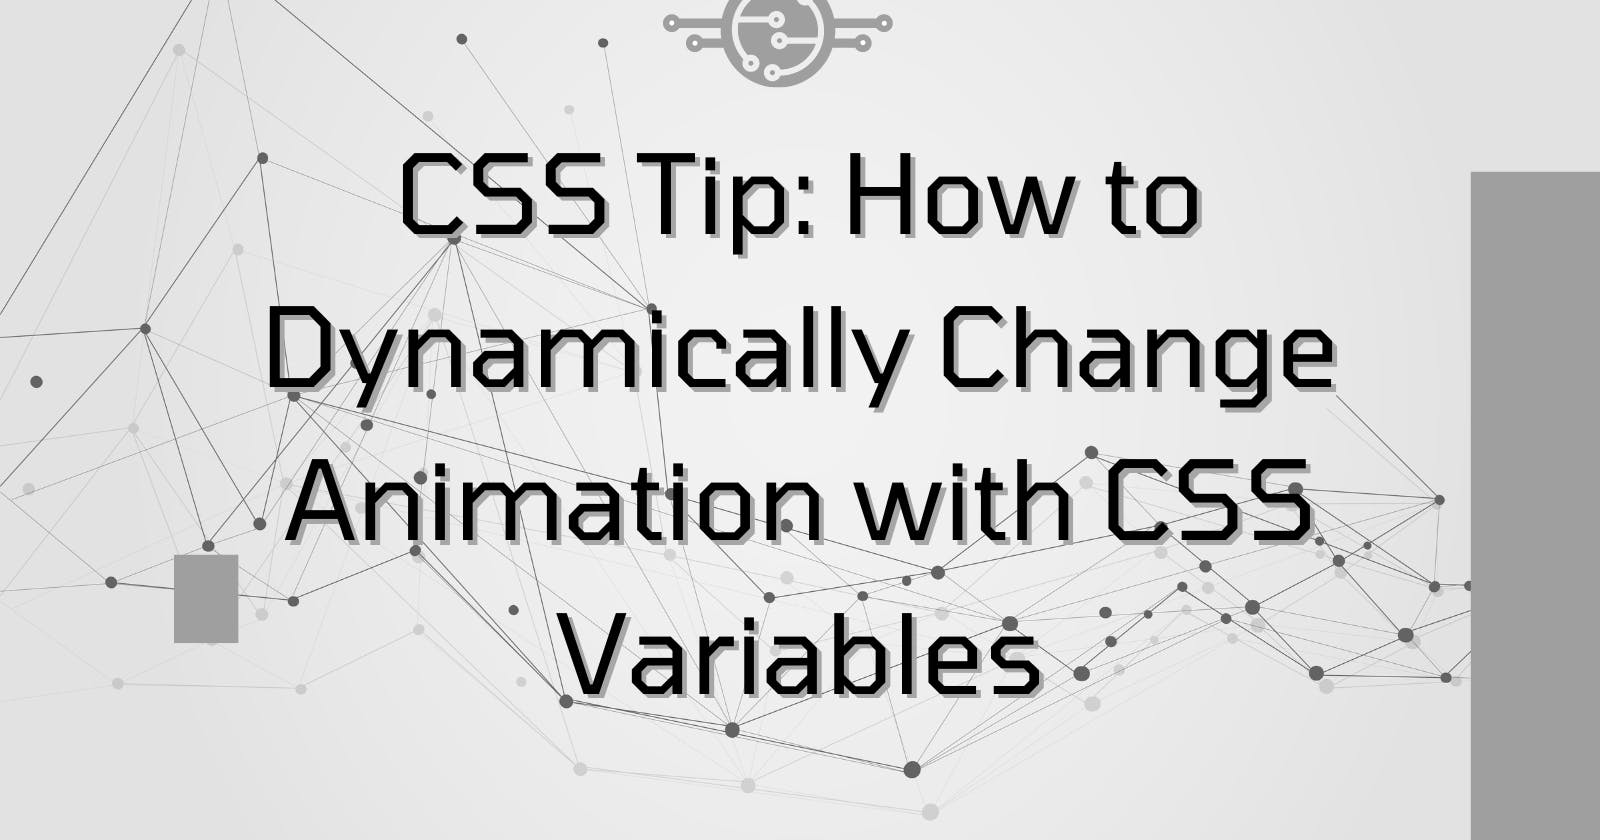 CSS Tip: How to Dynamically Change Animation with CSS Variables